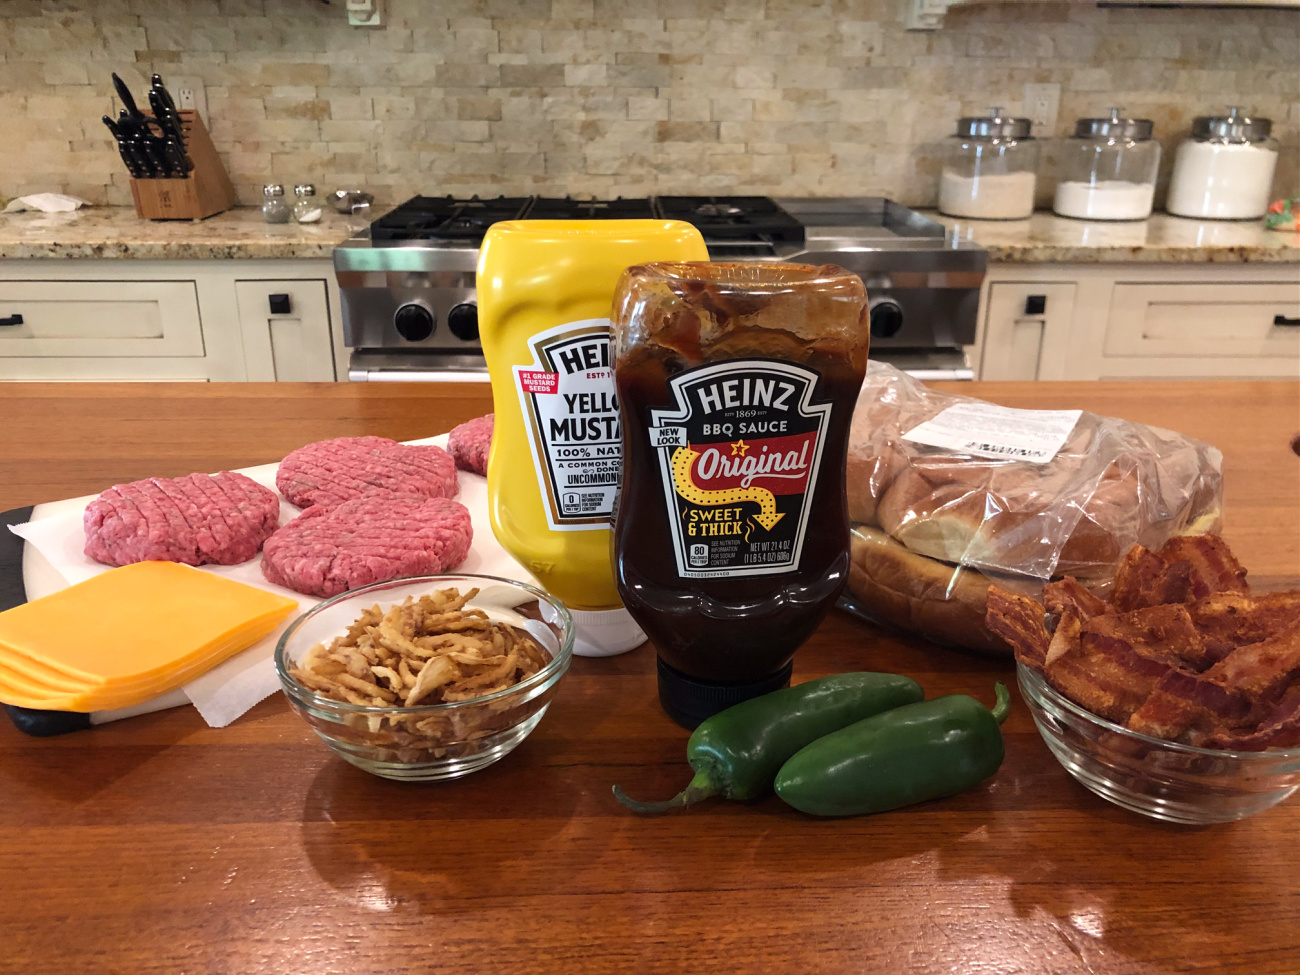 Enter The Heinz Art of the Burger Contest For A Chance To Win Big on I Heart Publix